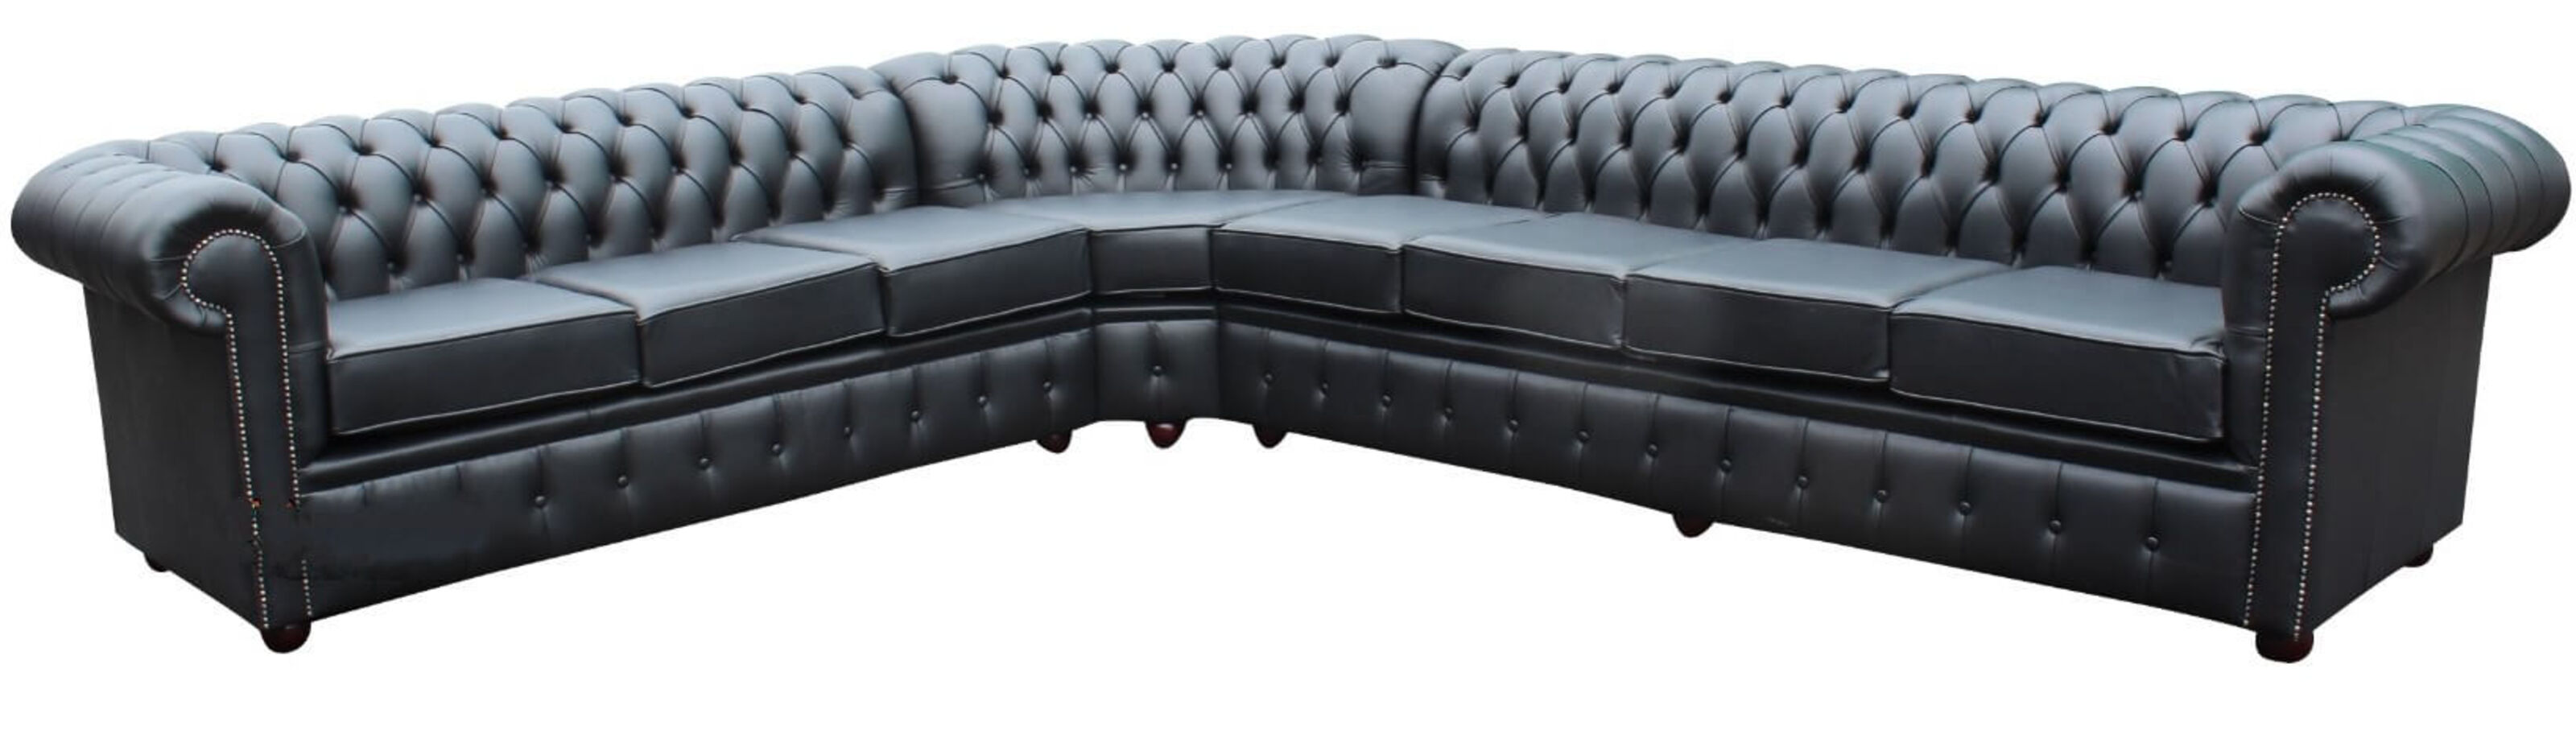 Bold and Beautiful Black Chesterfield Sofas  %Post Title